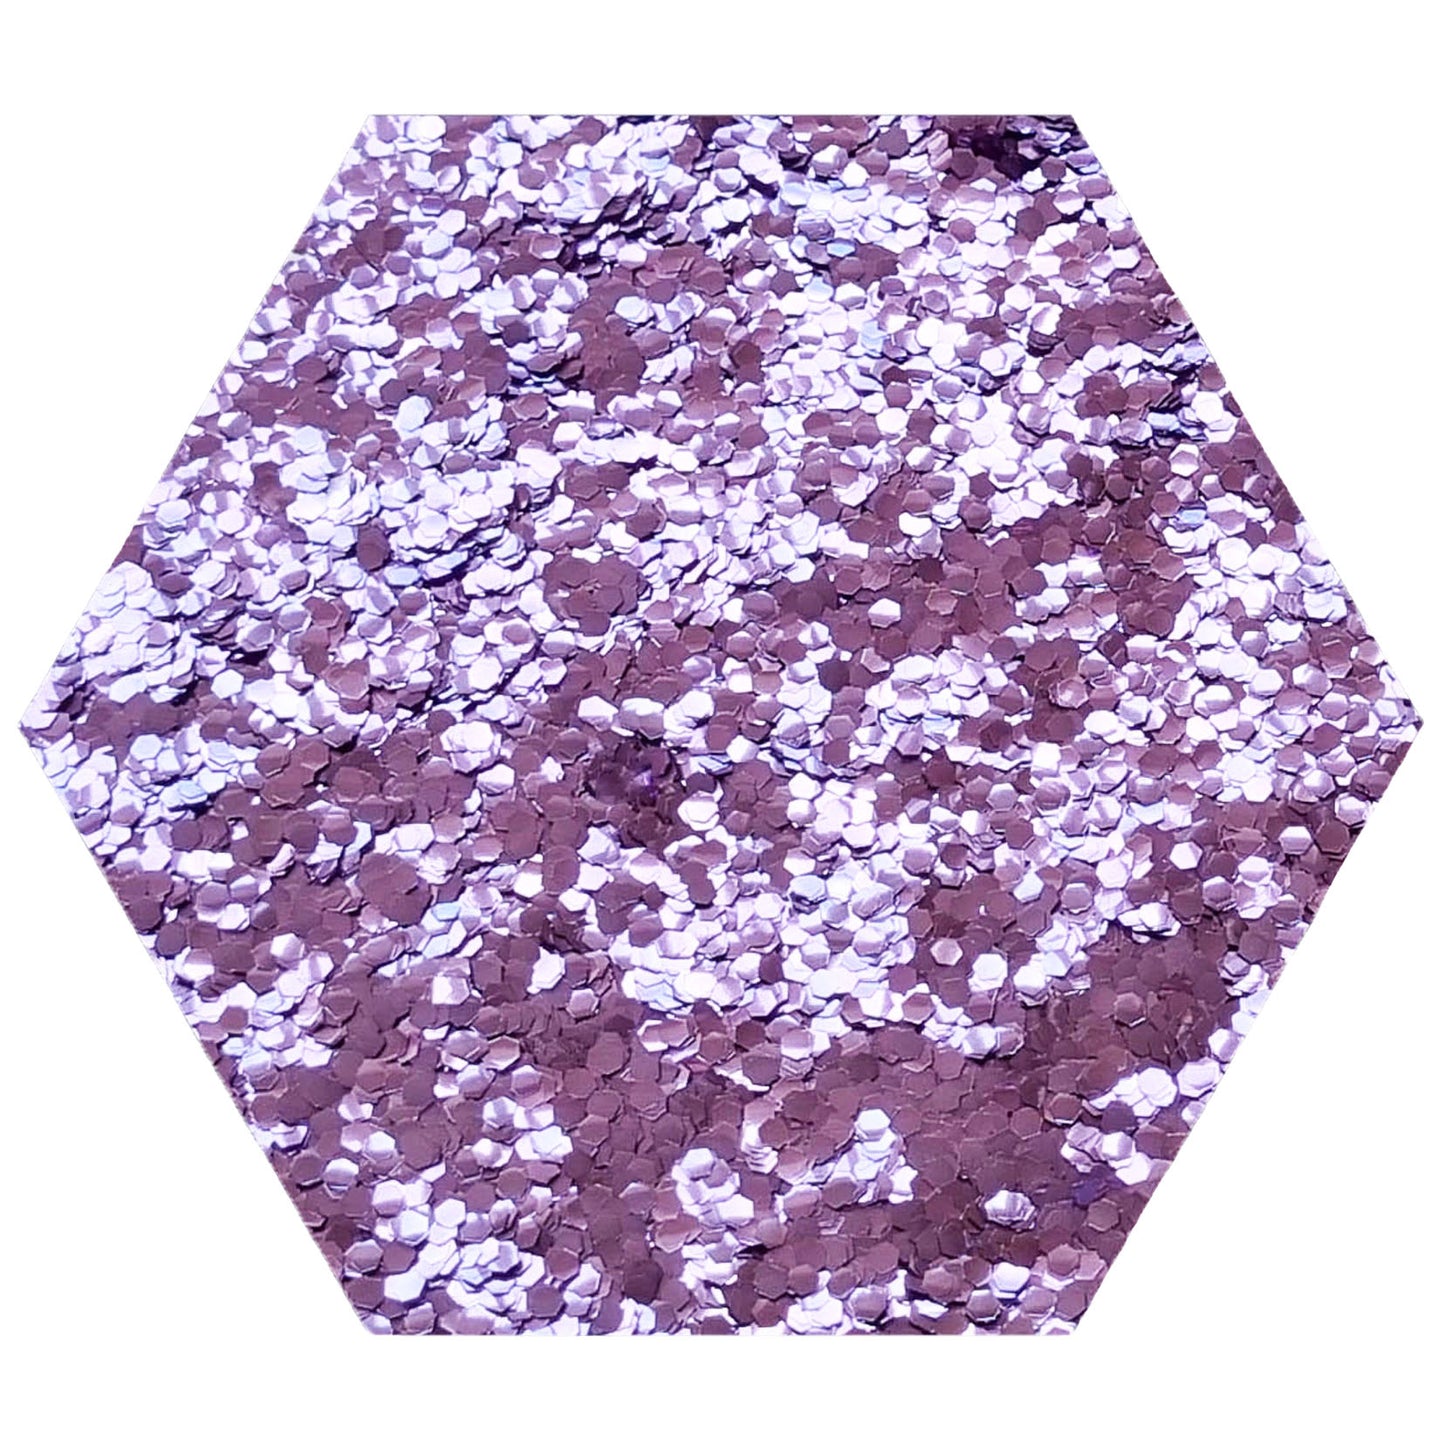 Violet Biodegradable Cosmetic Glitter | Chunky | Truly Personal | Wax Melt Bath Bombs Soap